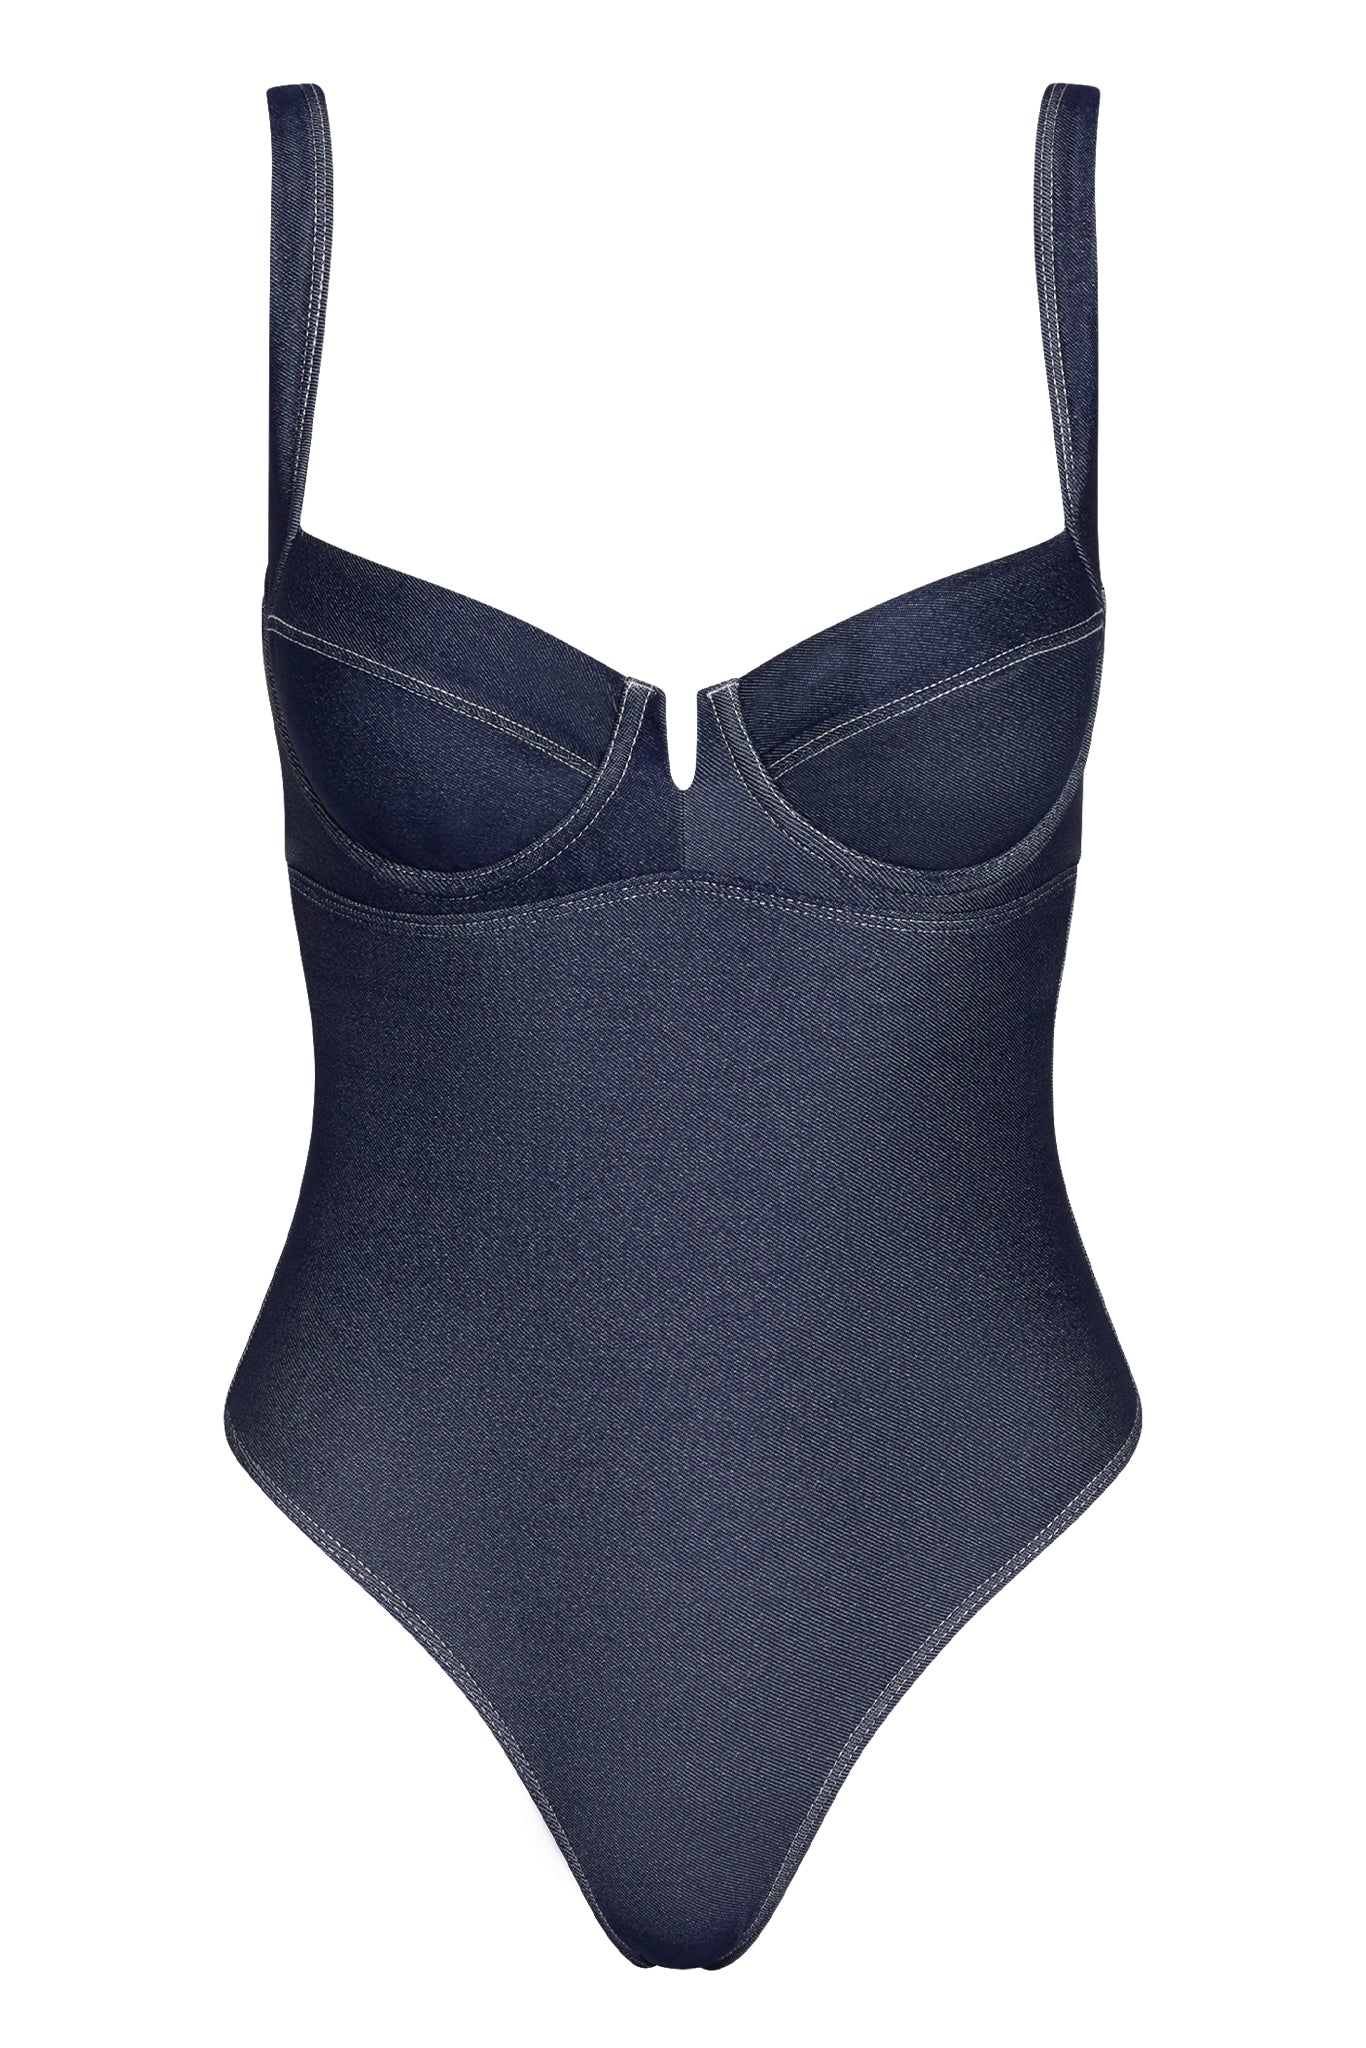 French Cut Swimsuit -  Canada